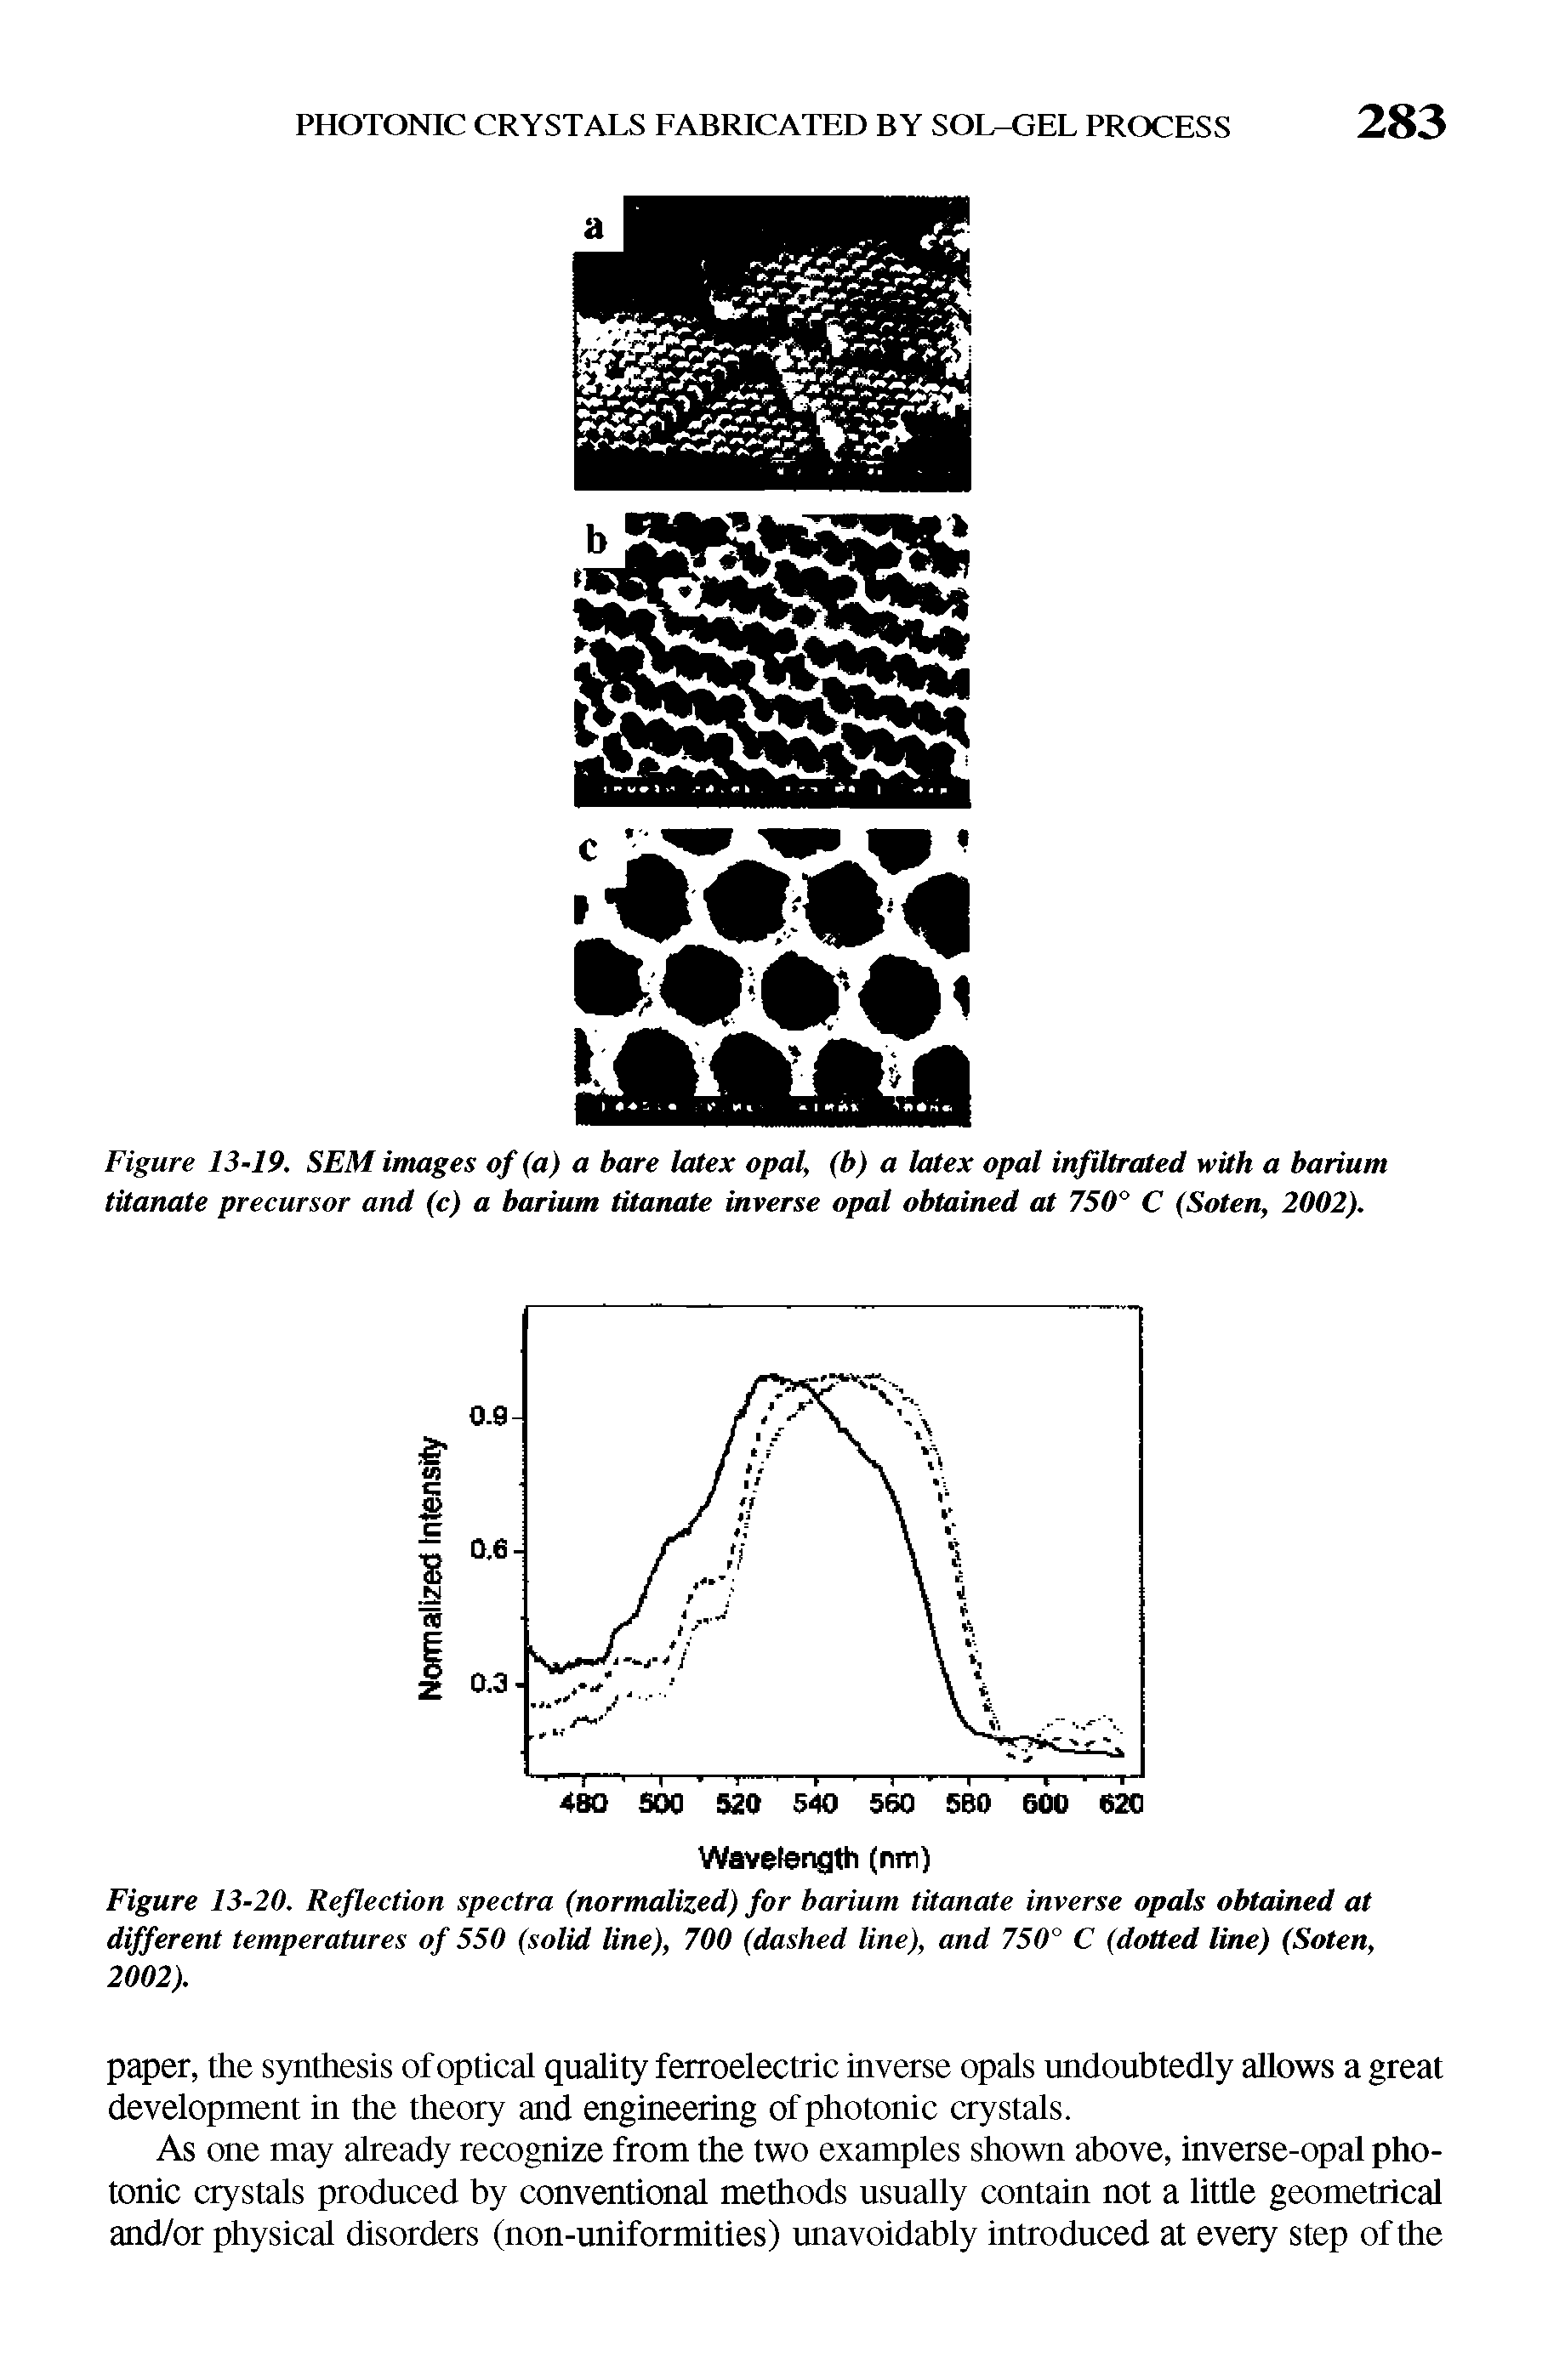 Figure 13-19, SEM images of (a) a bare latex opal, (b) a latex opal infiltrated with a barium titanate precursor and (c) a barium titanate inverse opal obtained at 750 C (Soten, 2002).